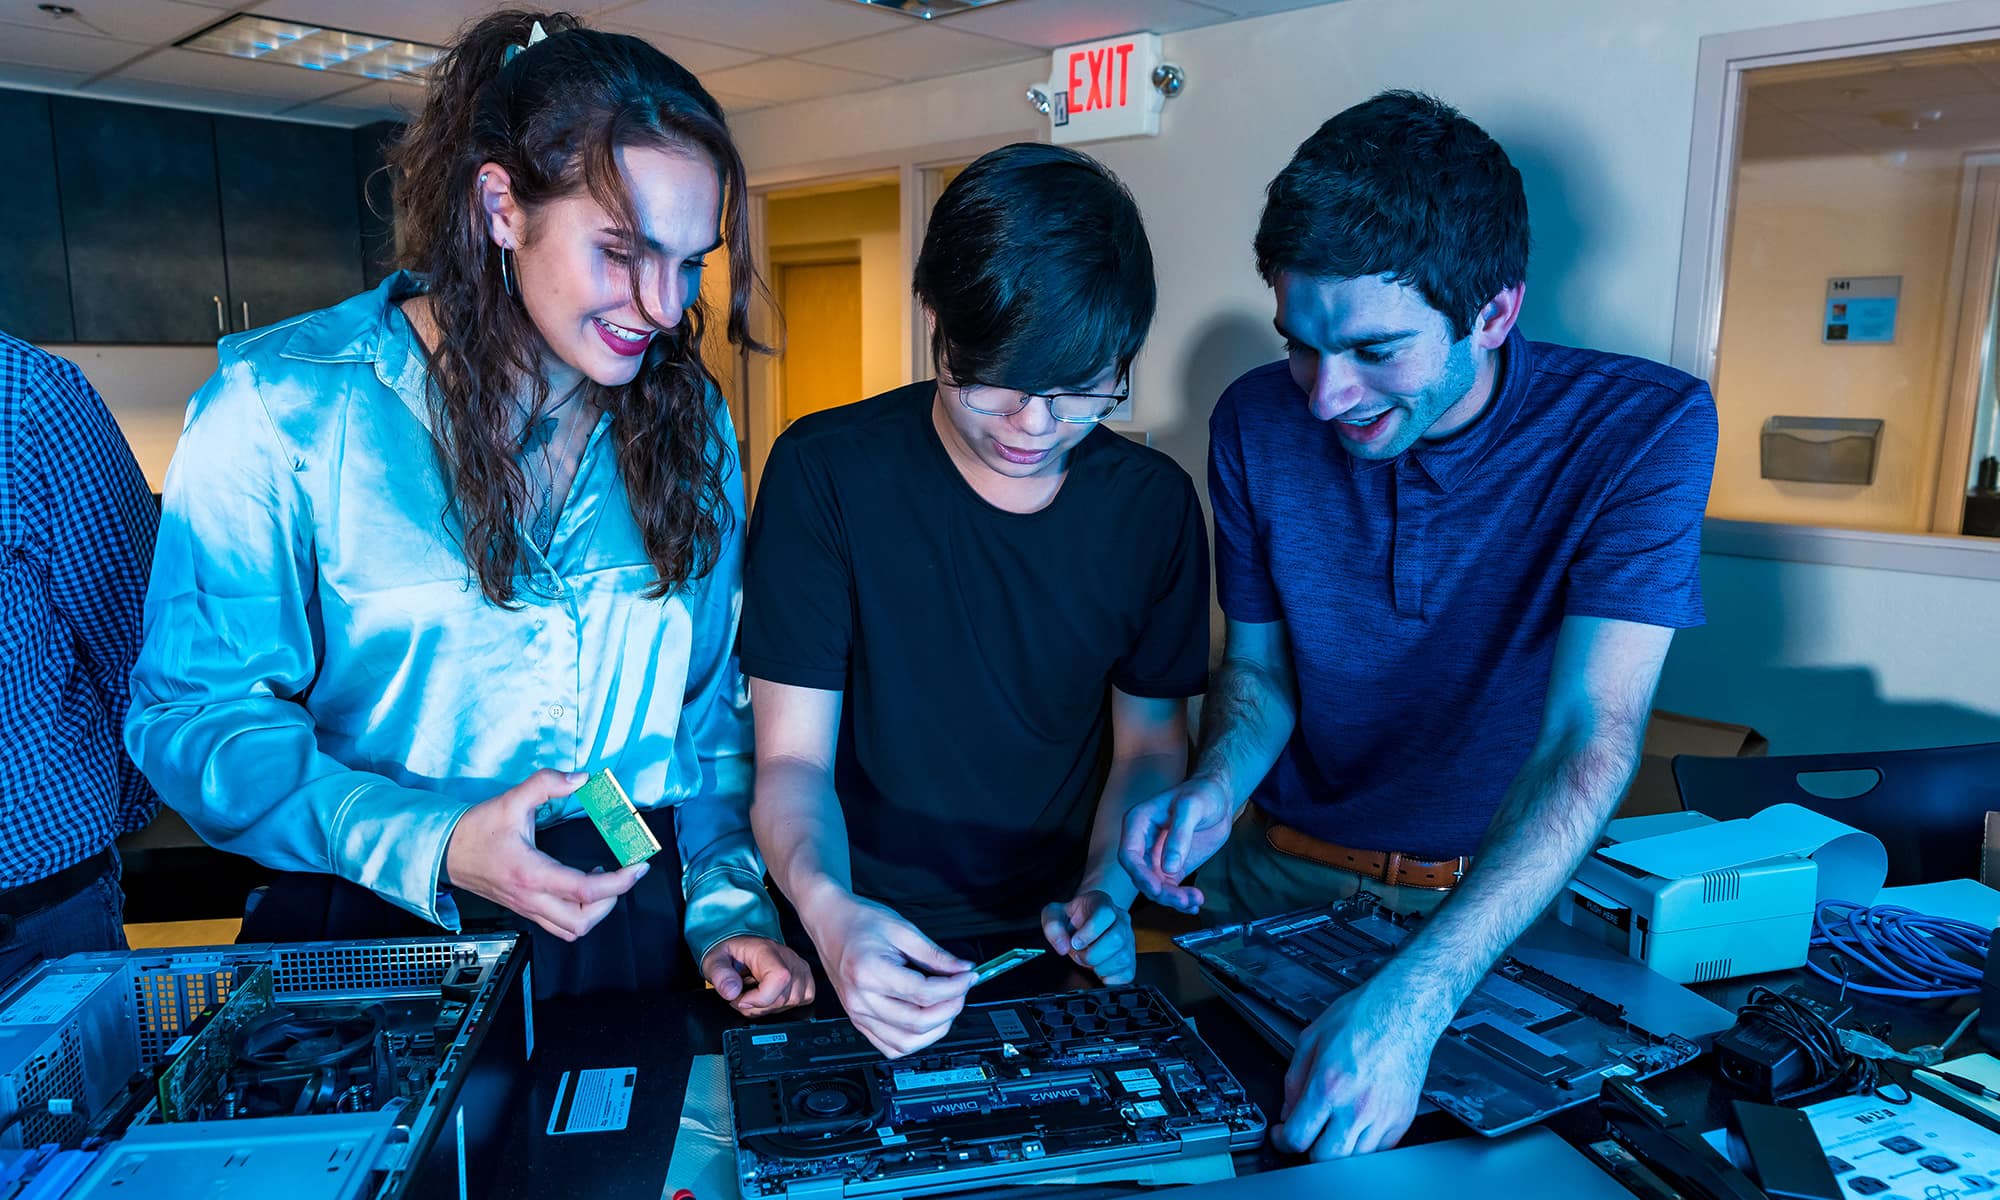 Three students enthusiastically work together on a circuit board in a lab.